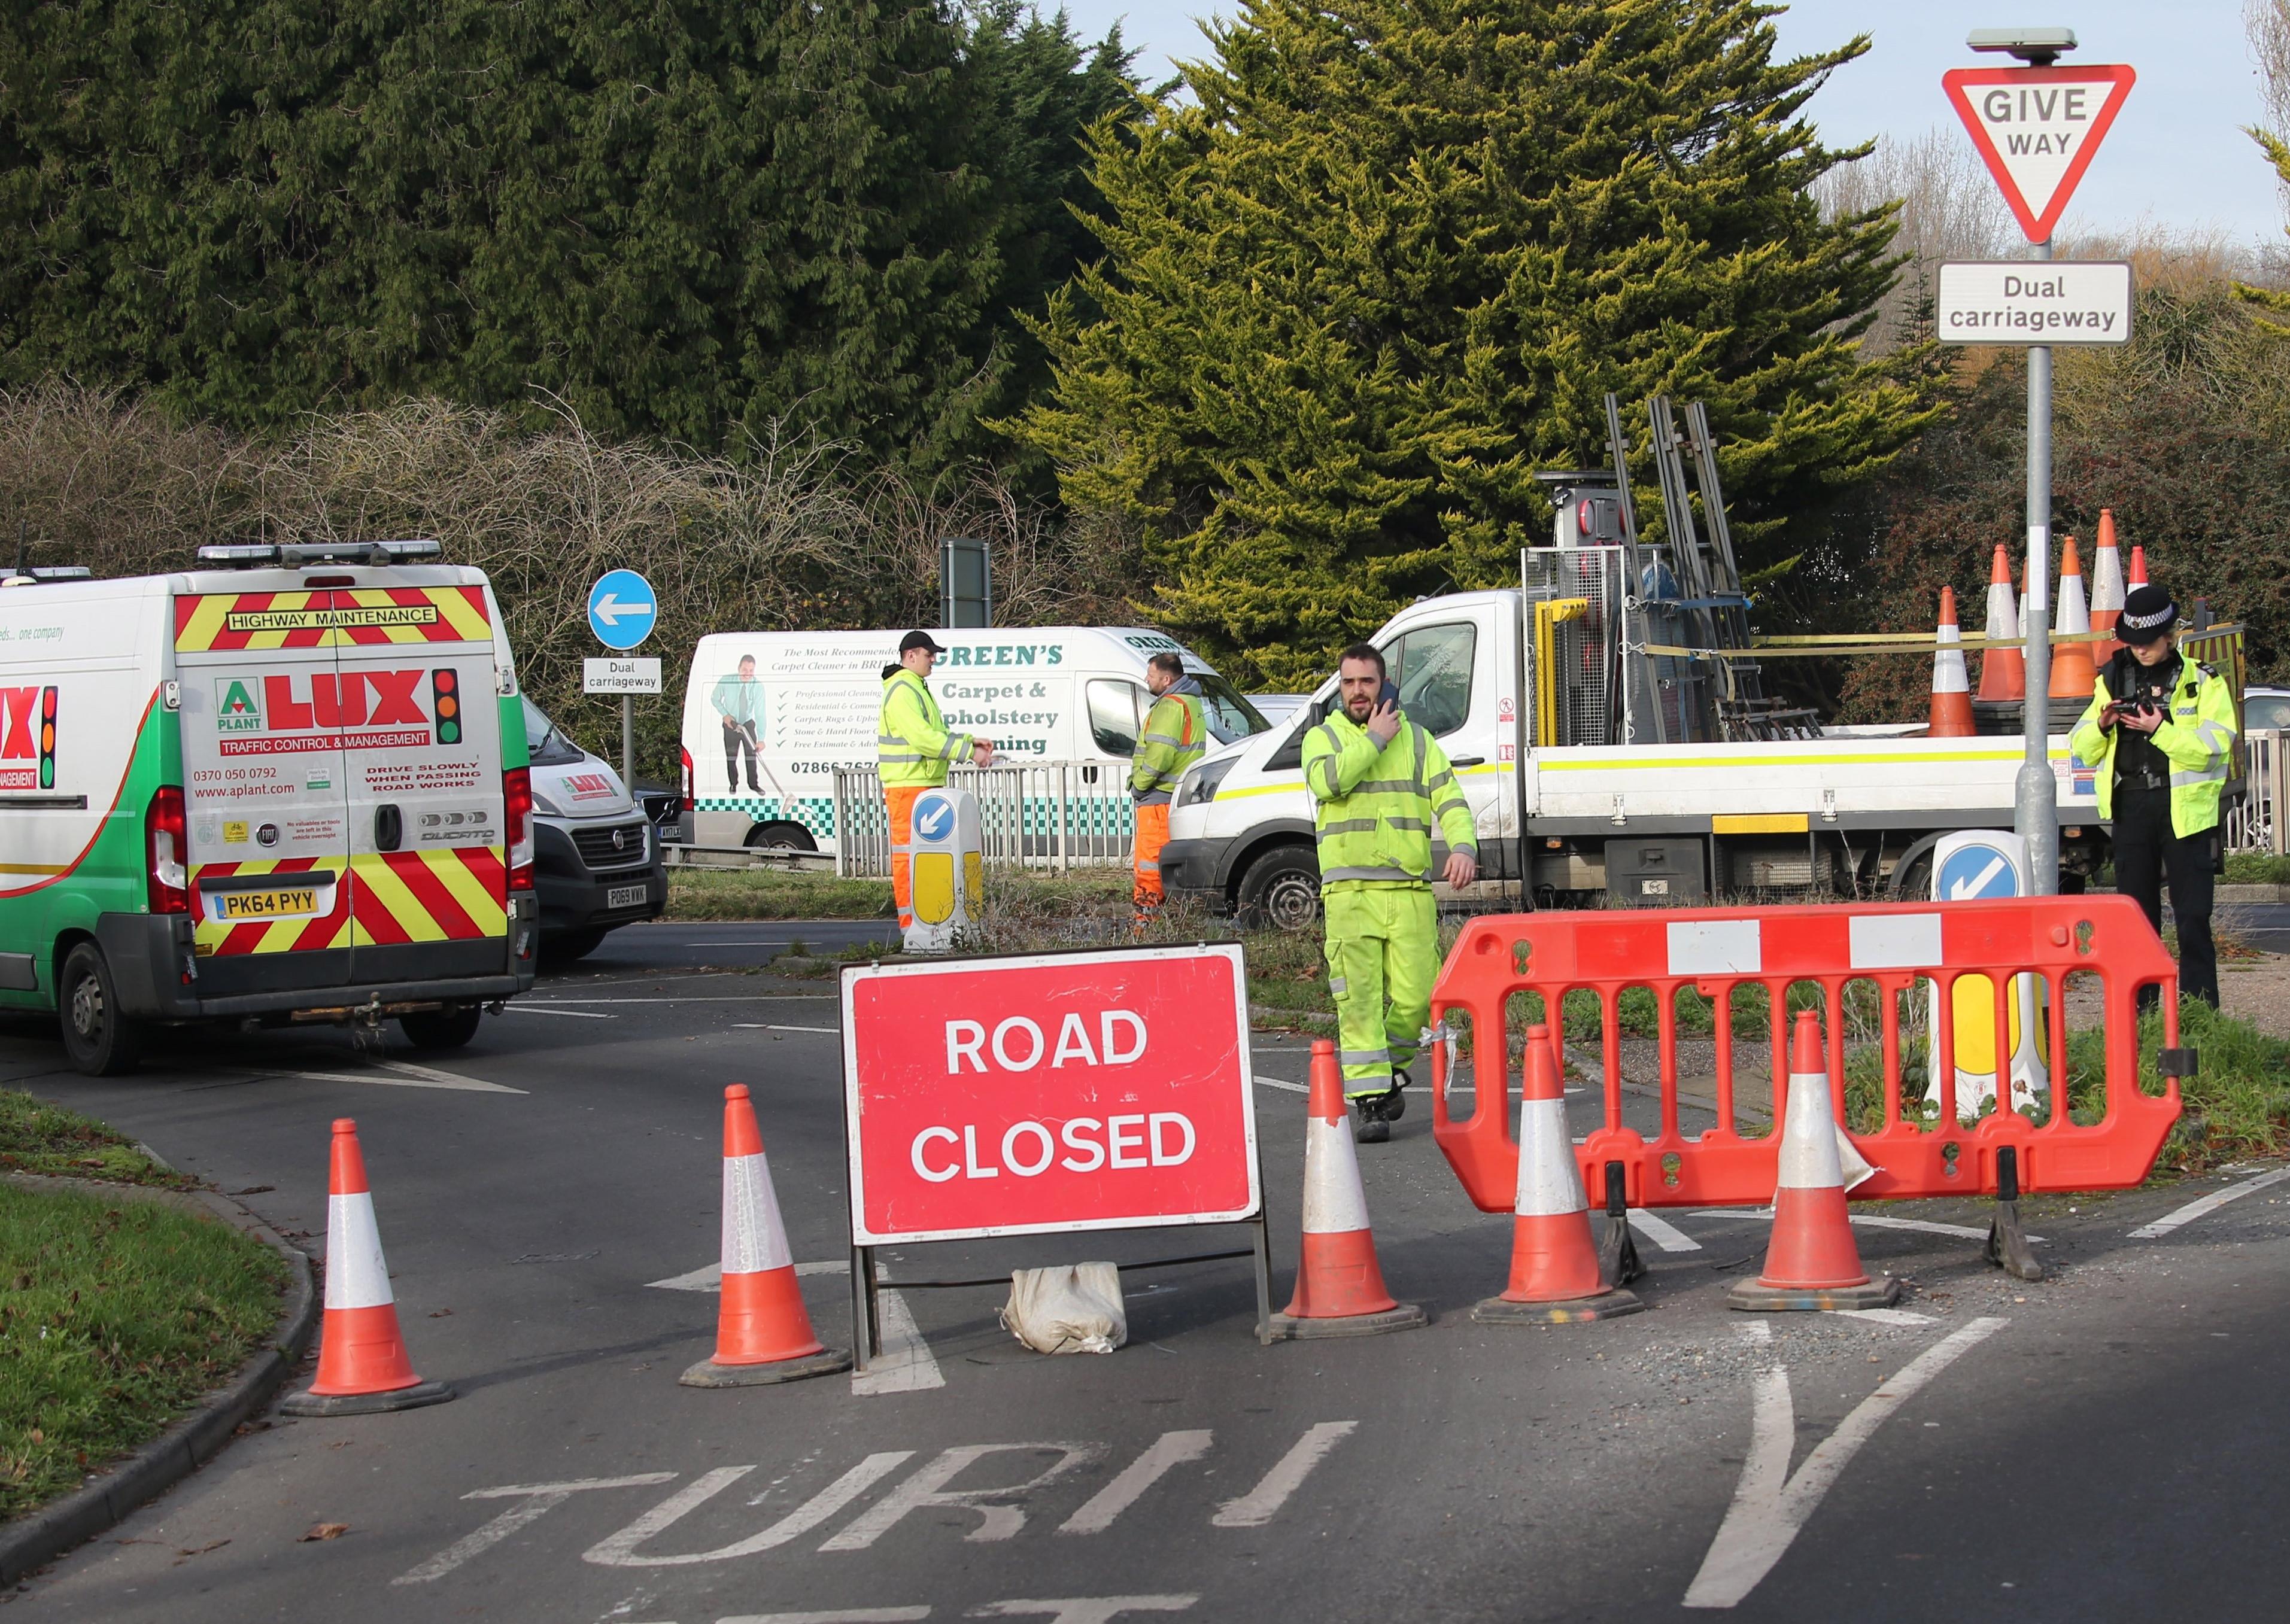 The road has been closed due to a gas leak